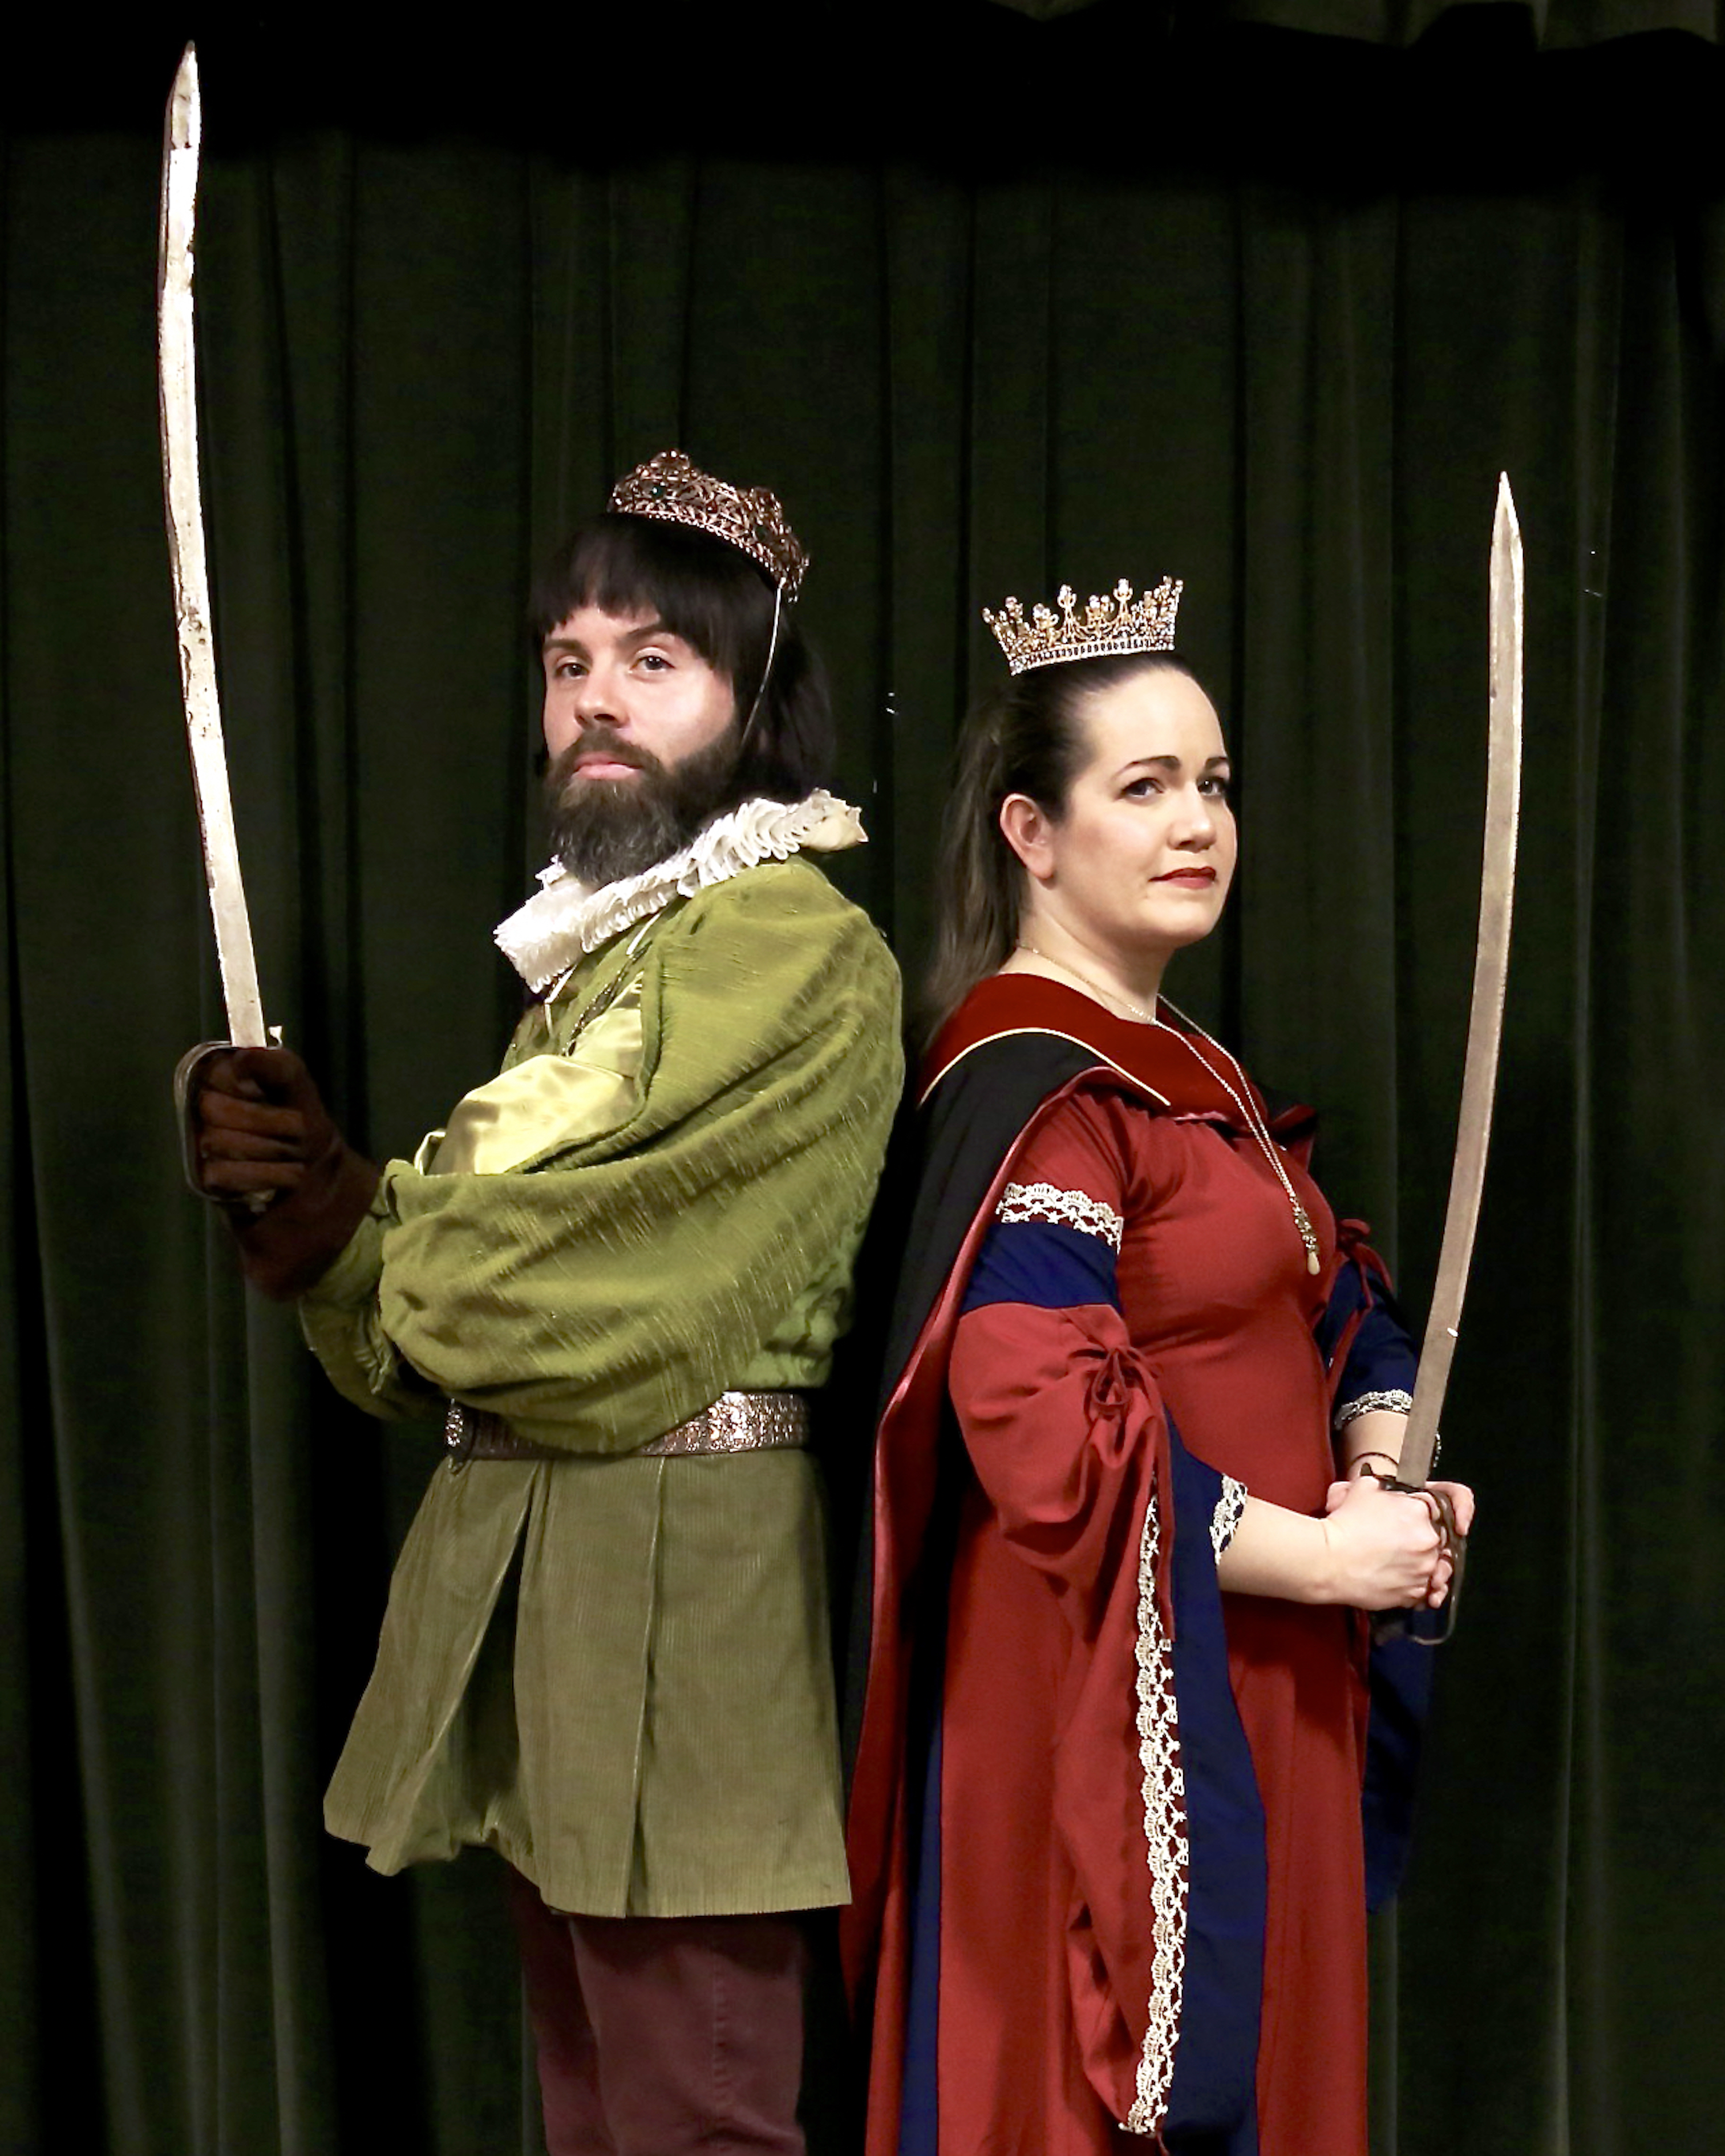 A color photo of the characters Prince Hilarion (Joseph Anthony Smith) and Princess Ida (Kara Vertucci) from Princess Ida. They are in period costume and wielding swords.